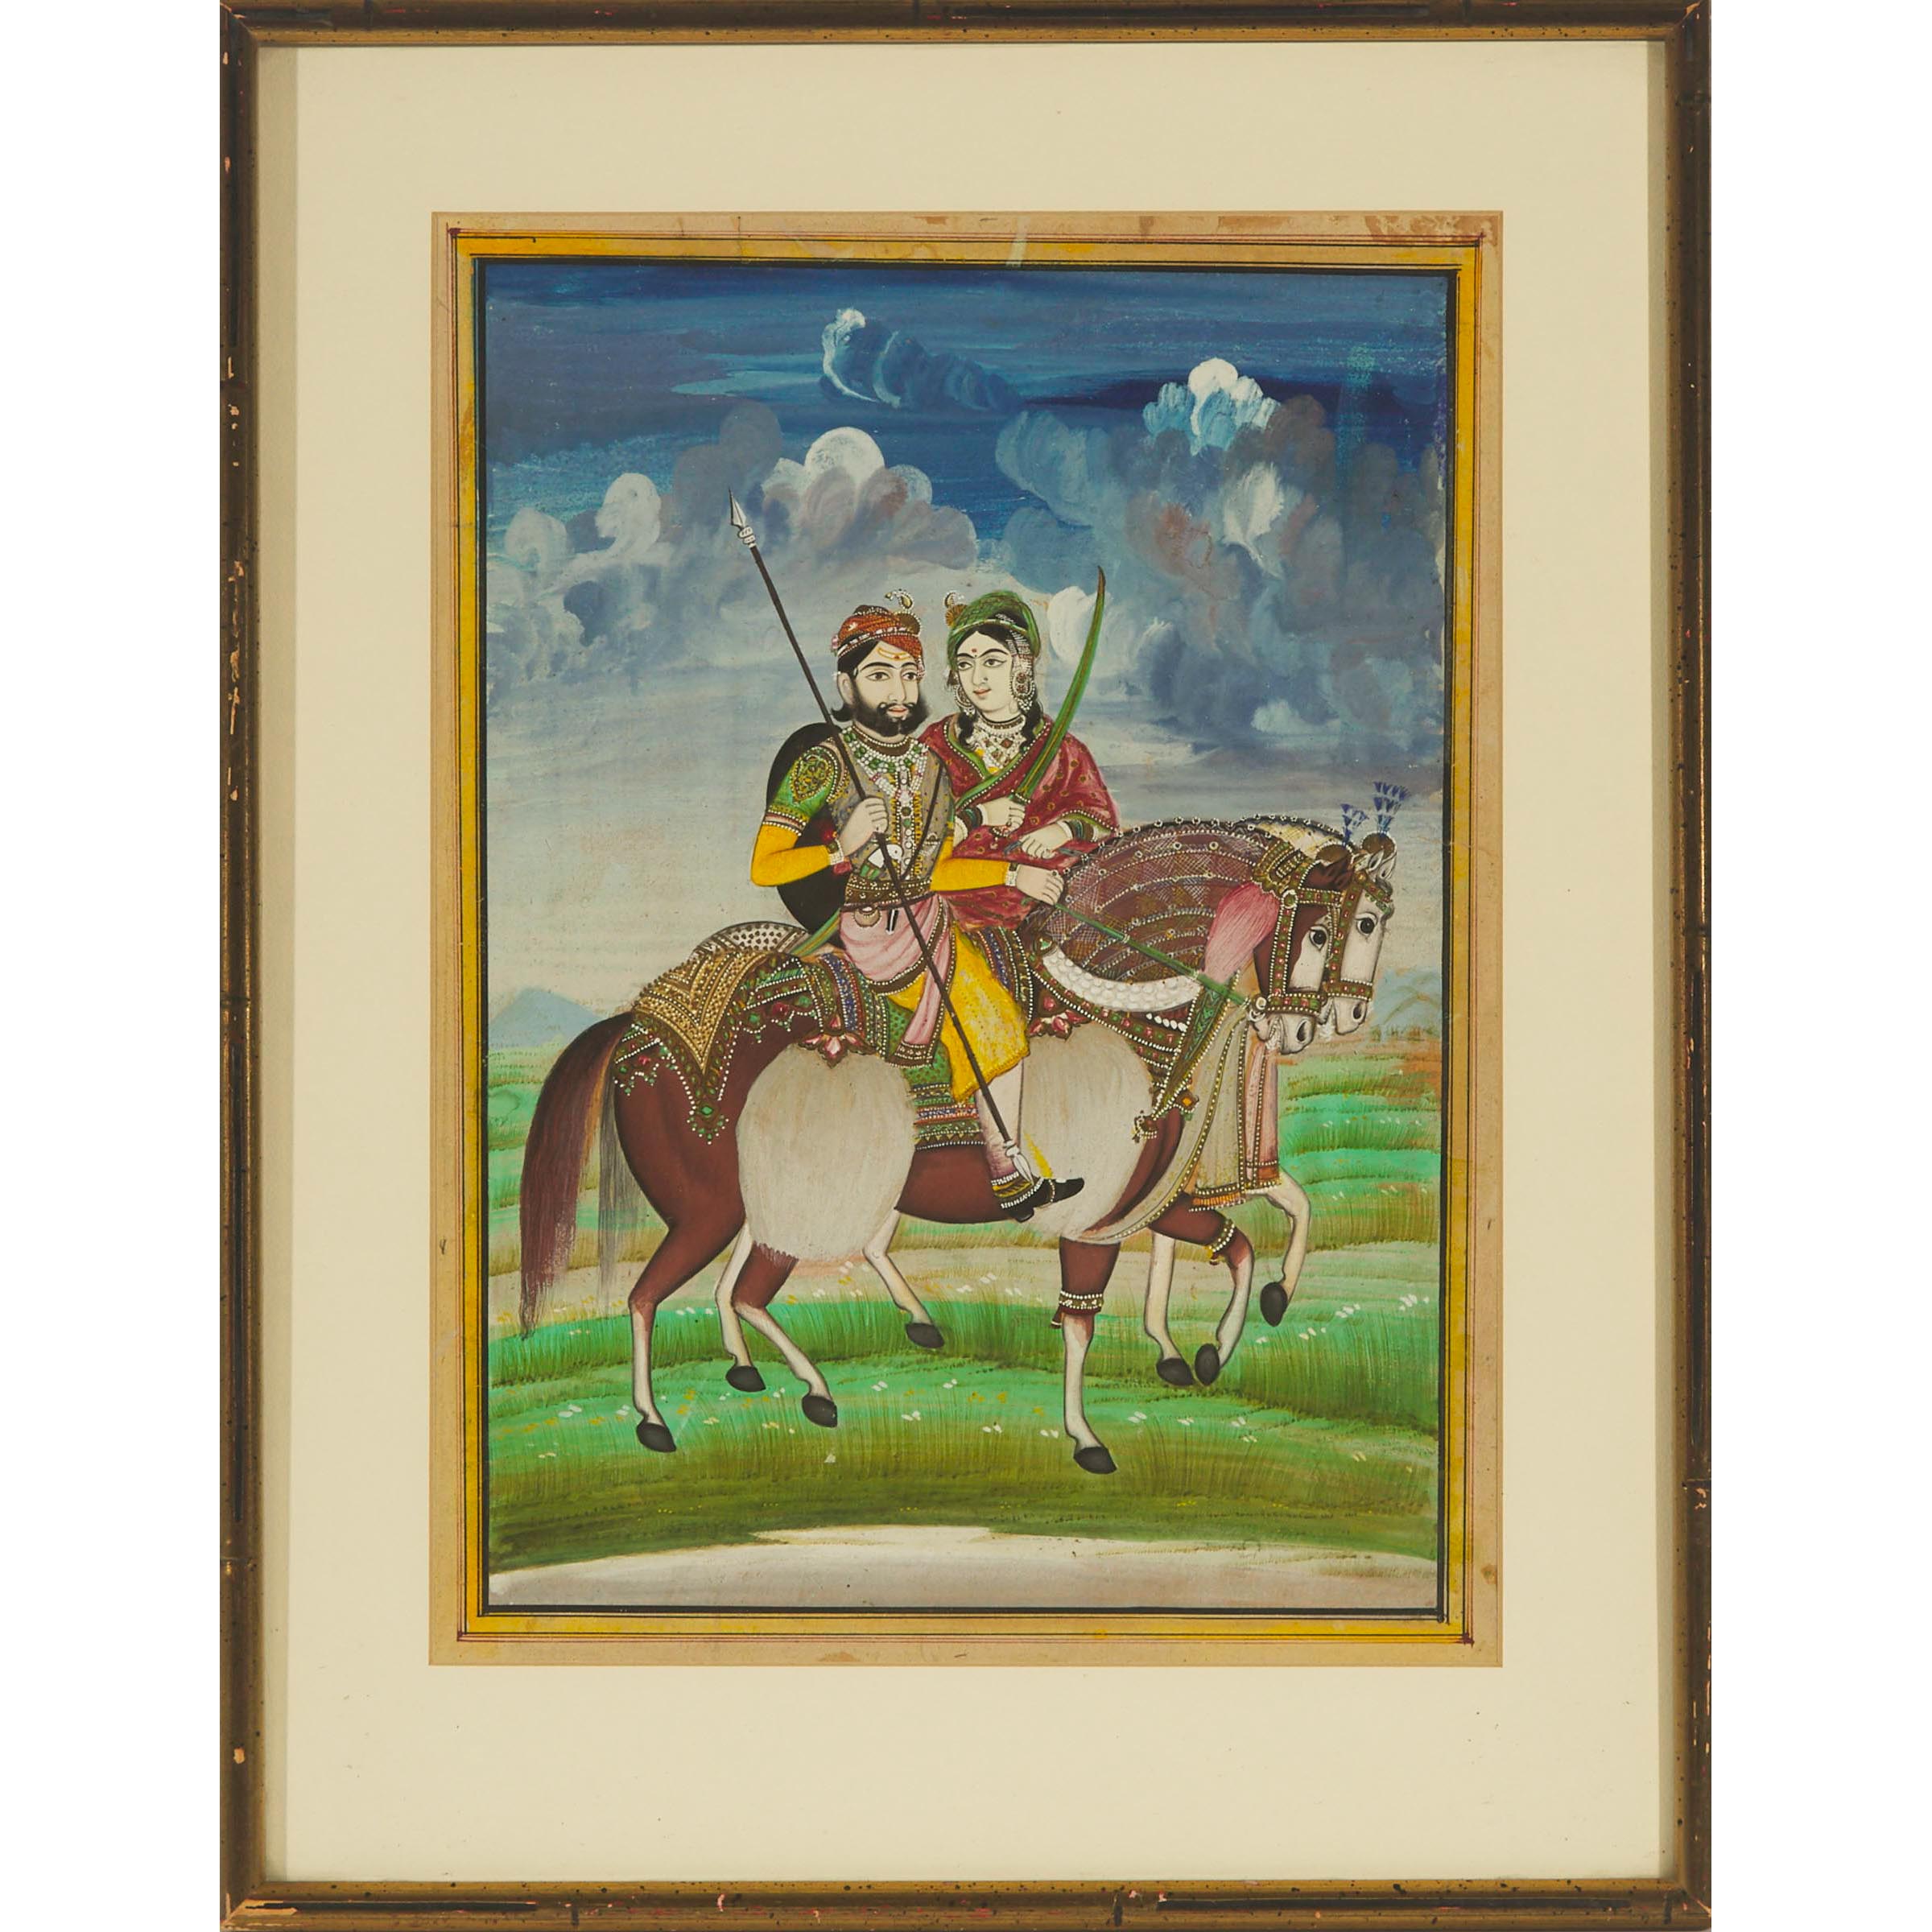 An Equestrian Portrait of Maharaja Ram Singh II of Jaipur (1835-1880) and Consort, Late 19th Century